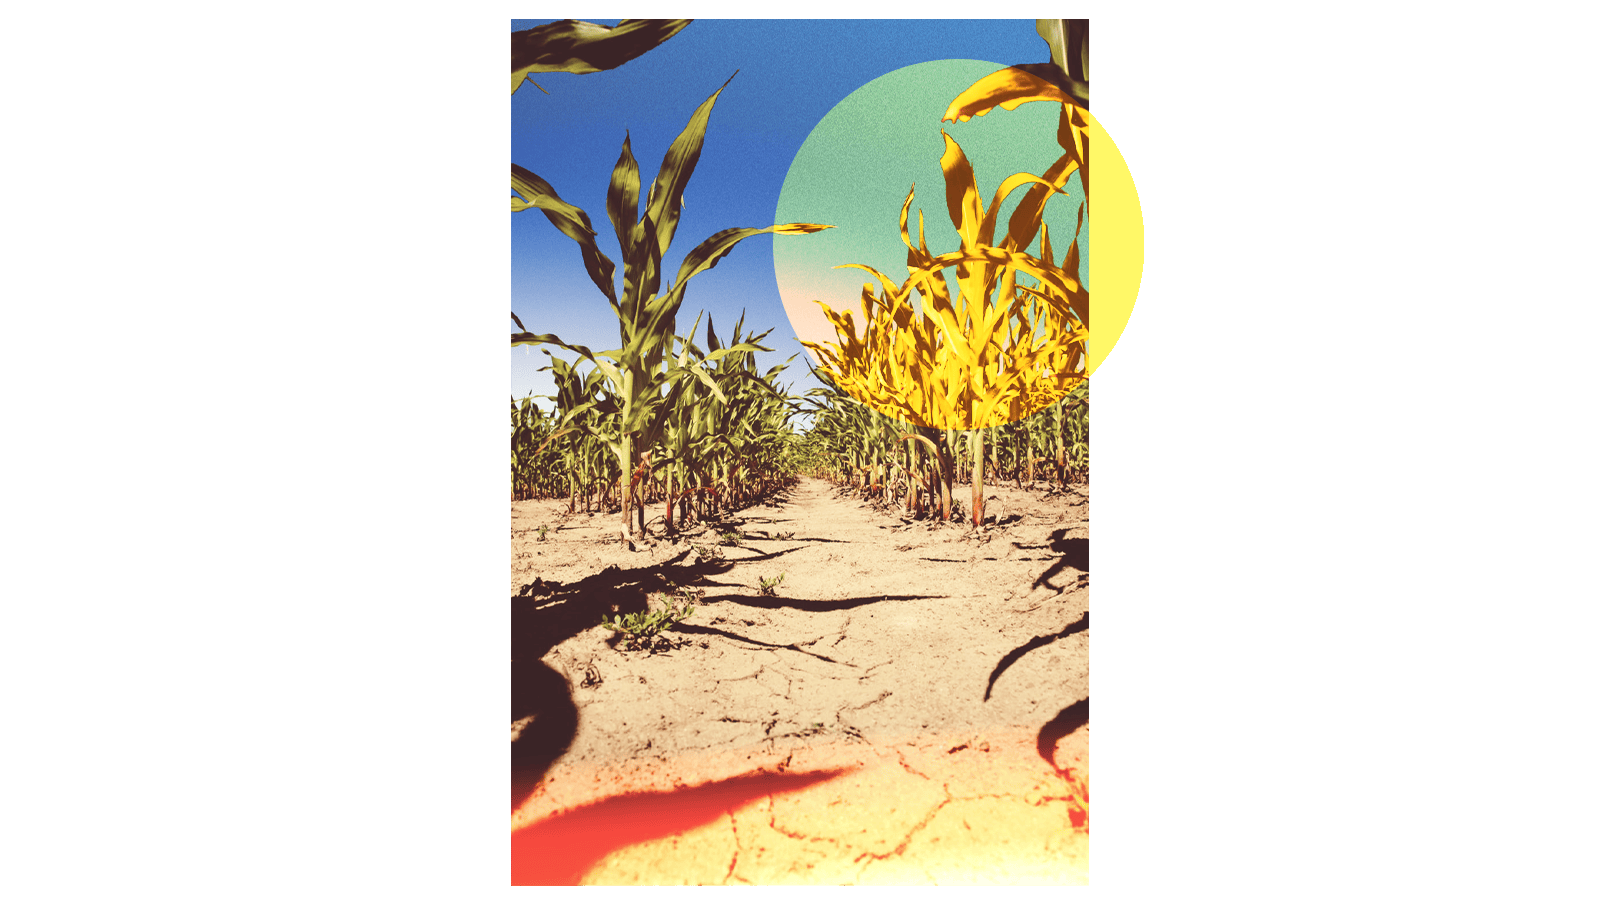 Photo of corn growing out of dry, cracked dirt, with a red and yellow glare at the bottom and a yellow circle overlaid on the top right corner